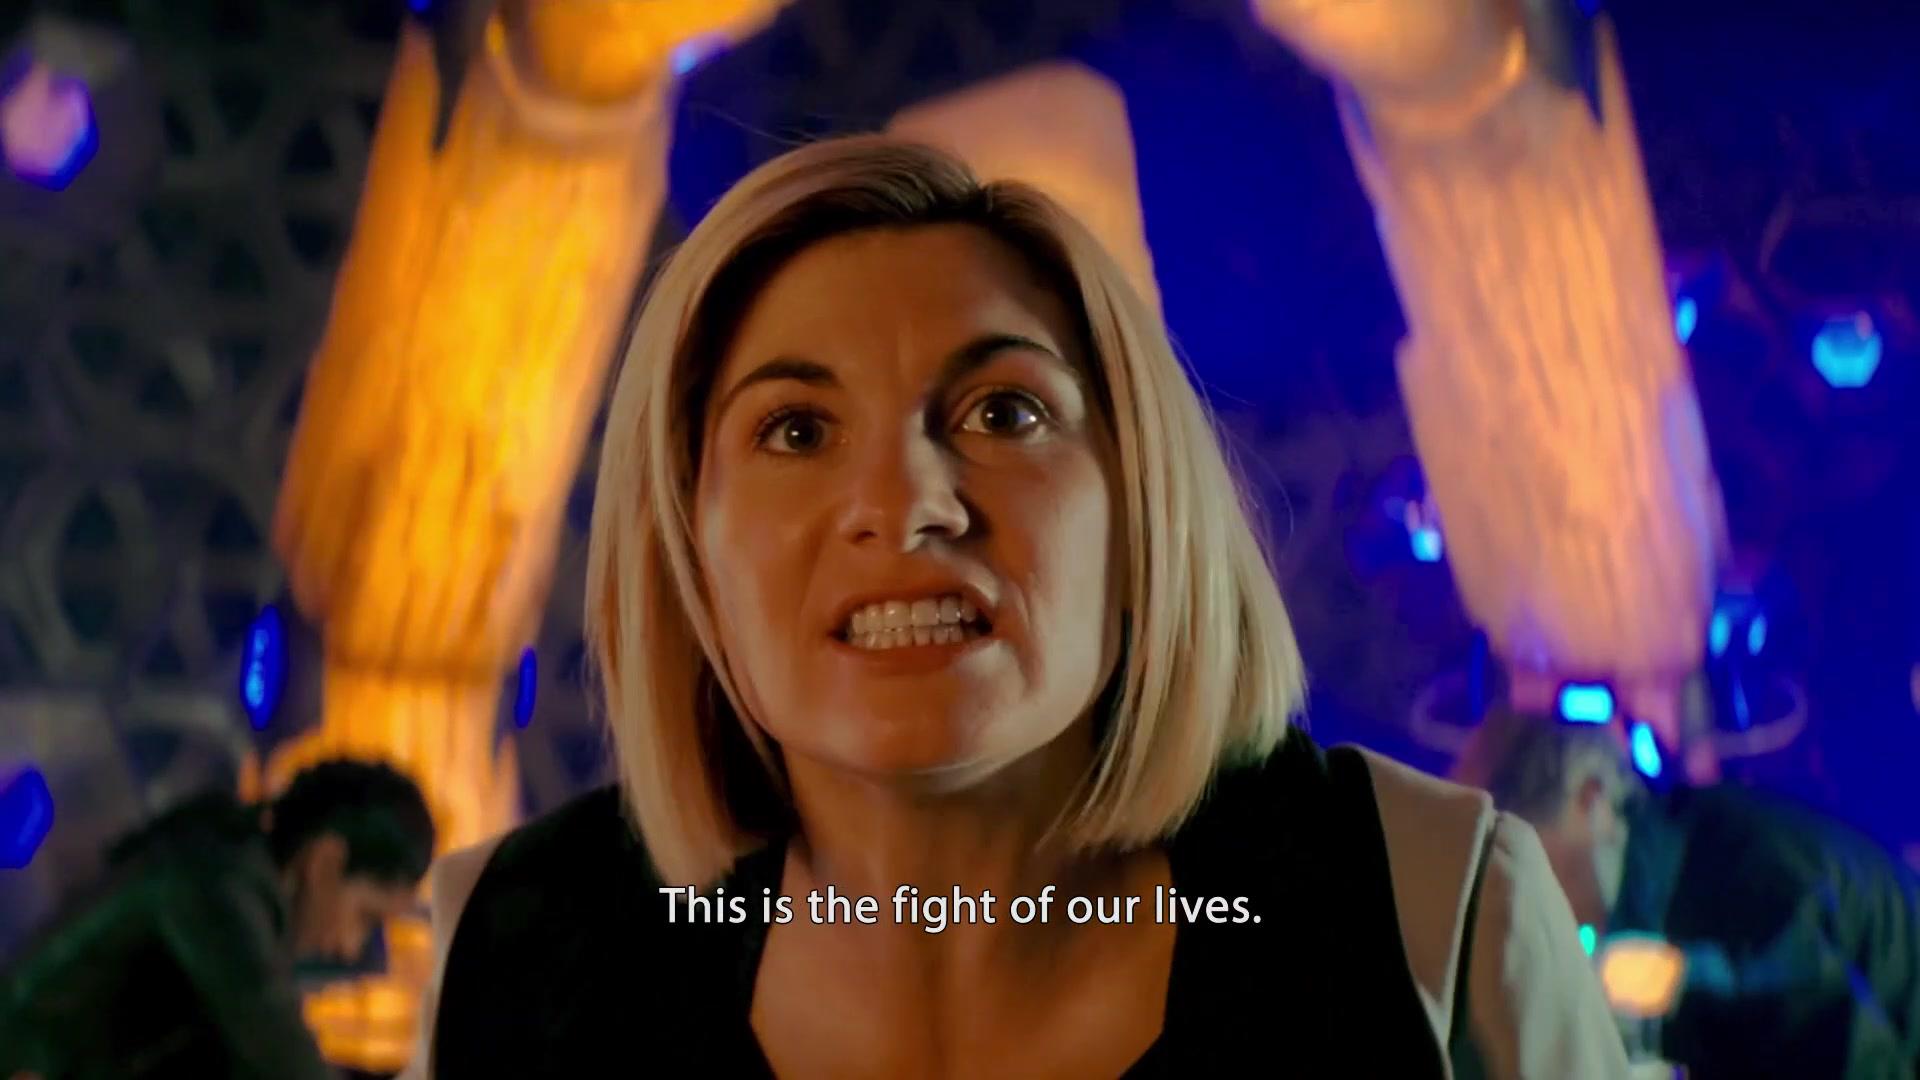 Watch 'Doctor Who' Returns October 31 on BBC America | Doctor Who Video Extras